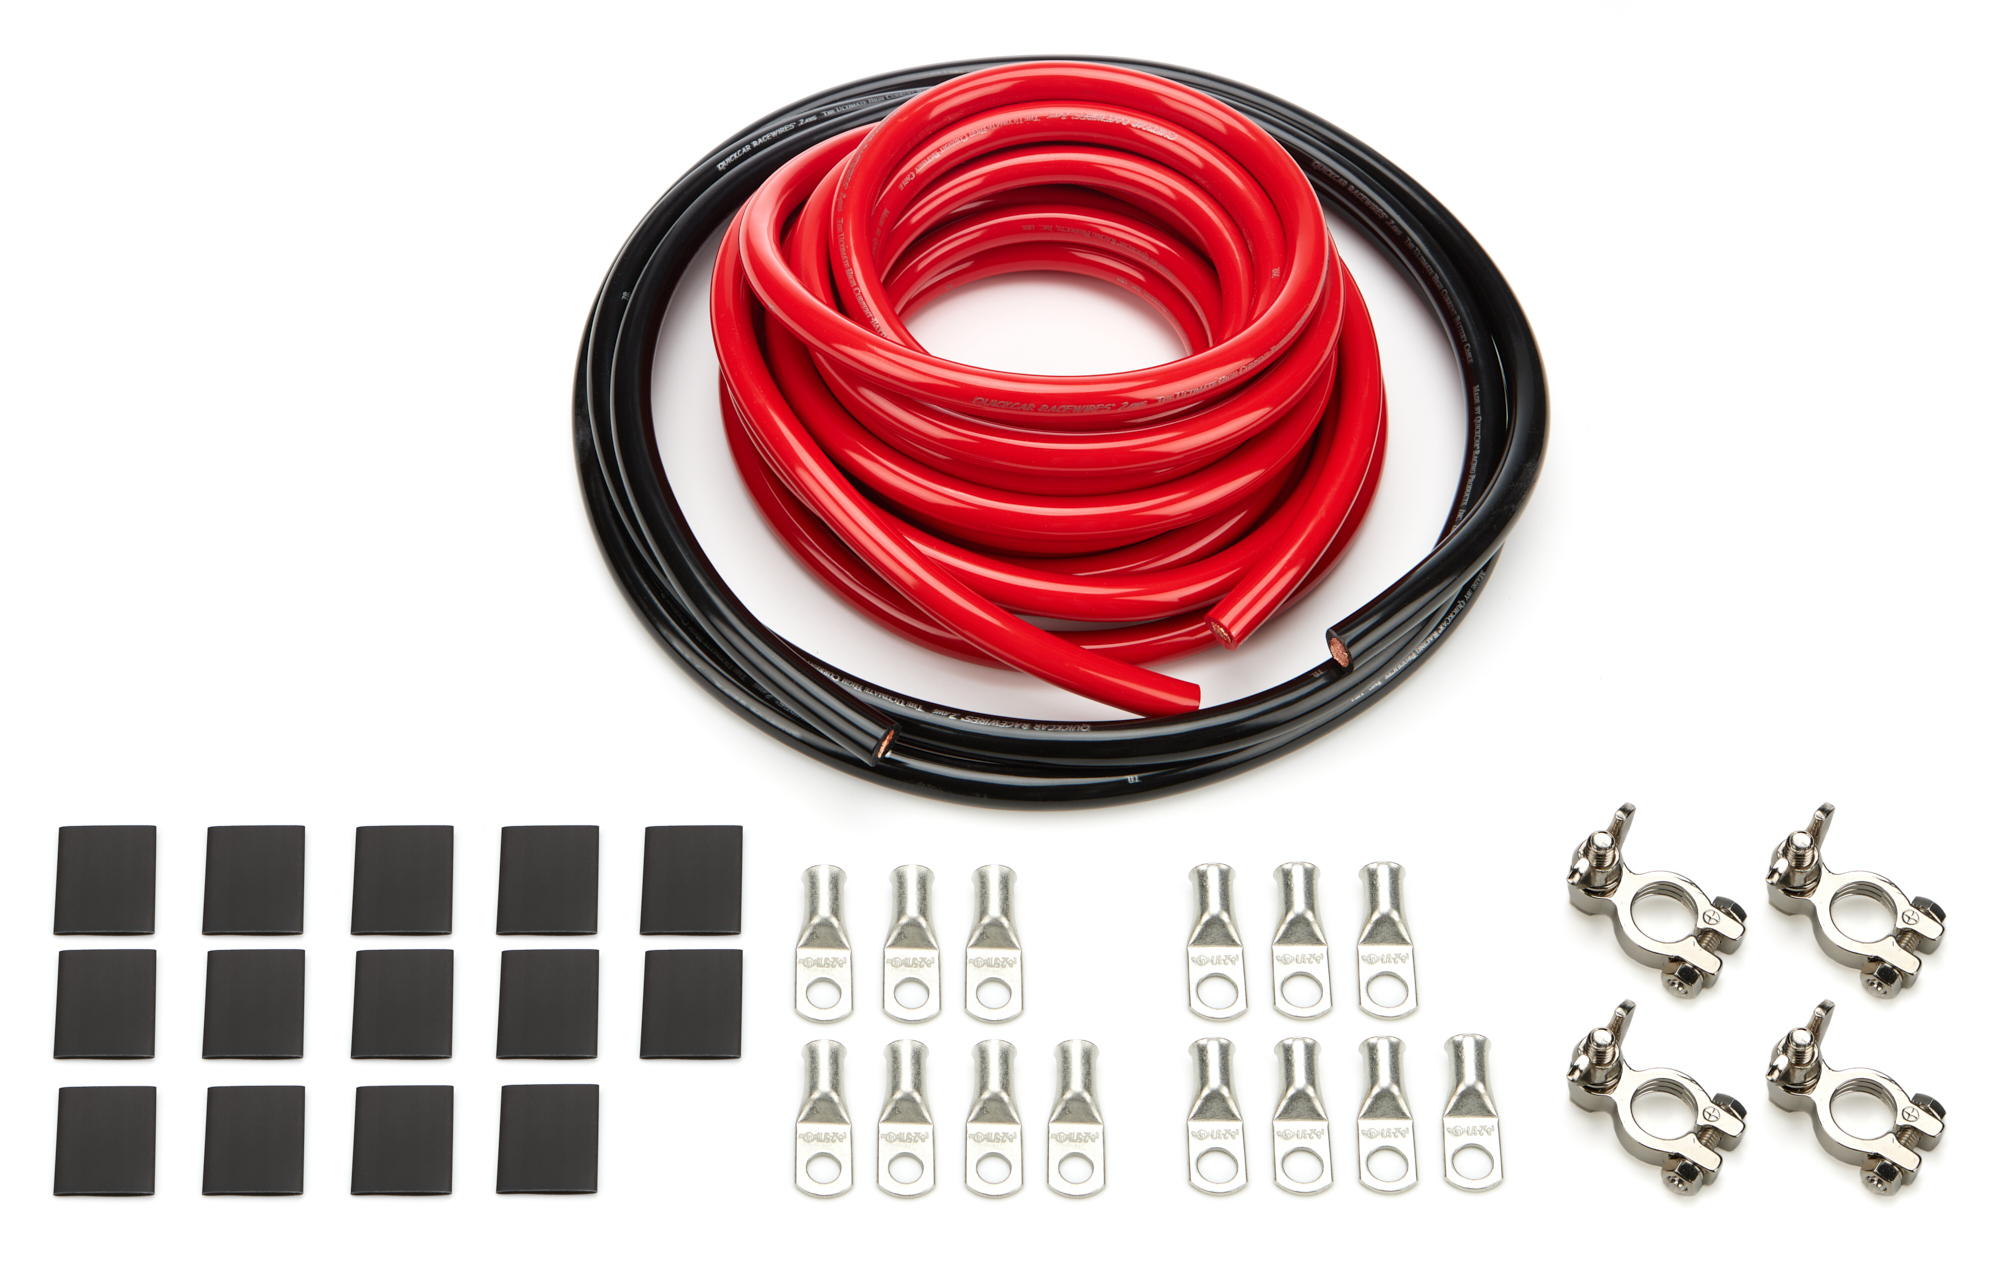 QuickCar 57-012 Battery Cable Kit, Drag Race, 2 Gauge, Top Mount Terminals, Dual Battery, Terminals / Heat Shrink Included, Copper, 25 ft Red / 8 ft Black, Kit